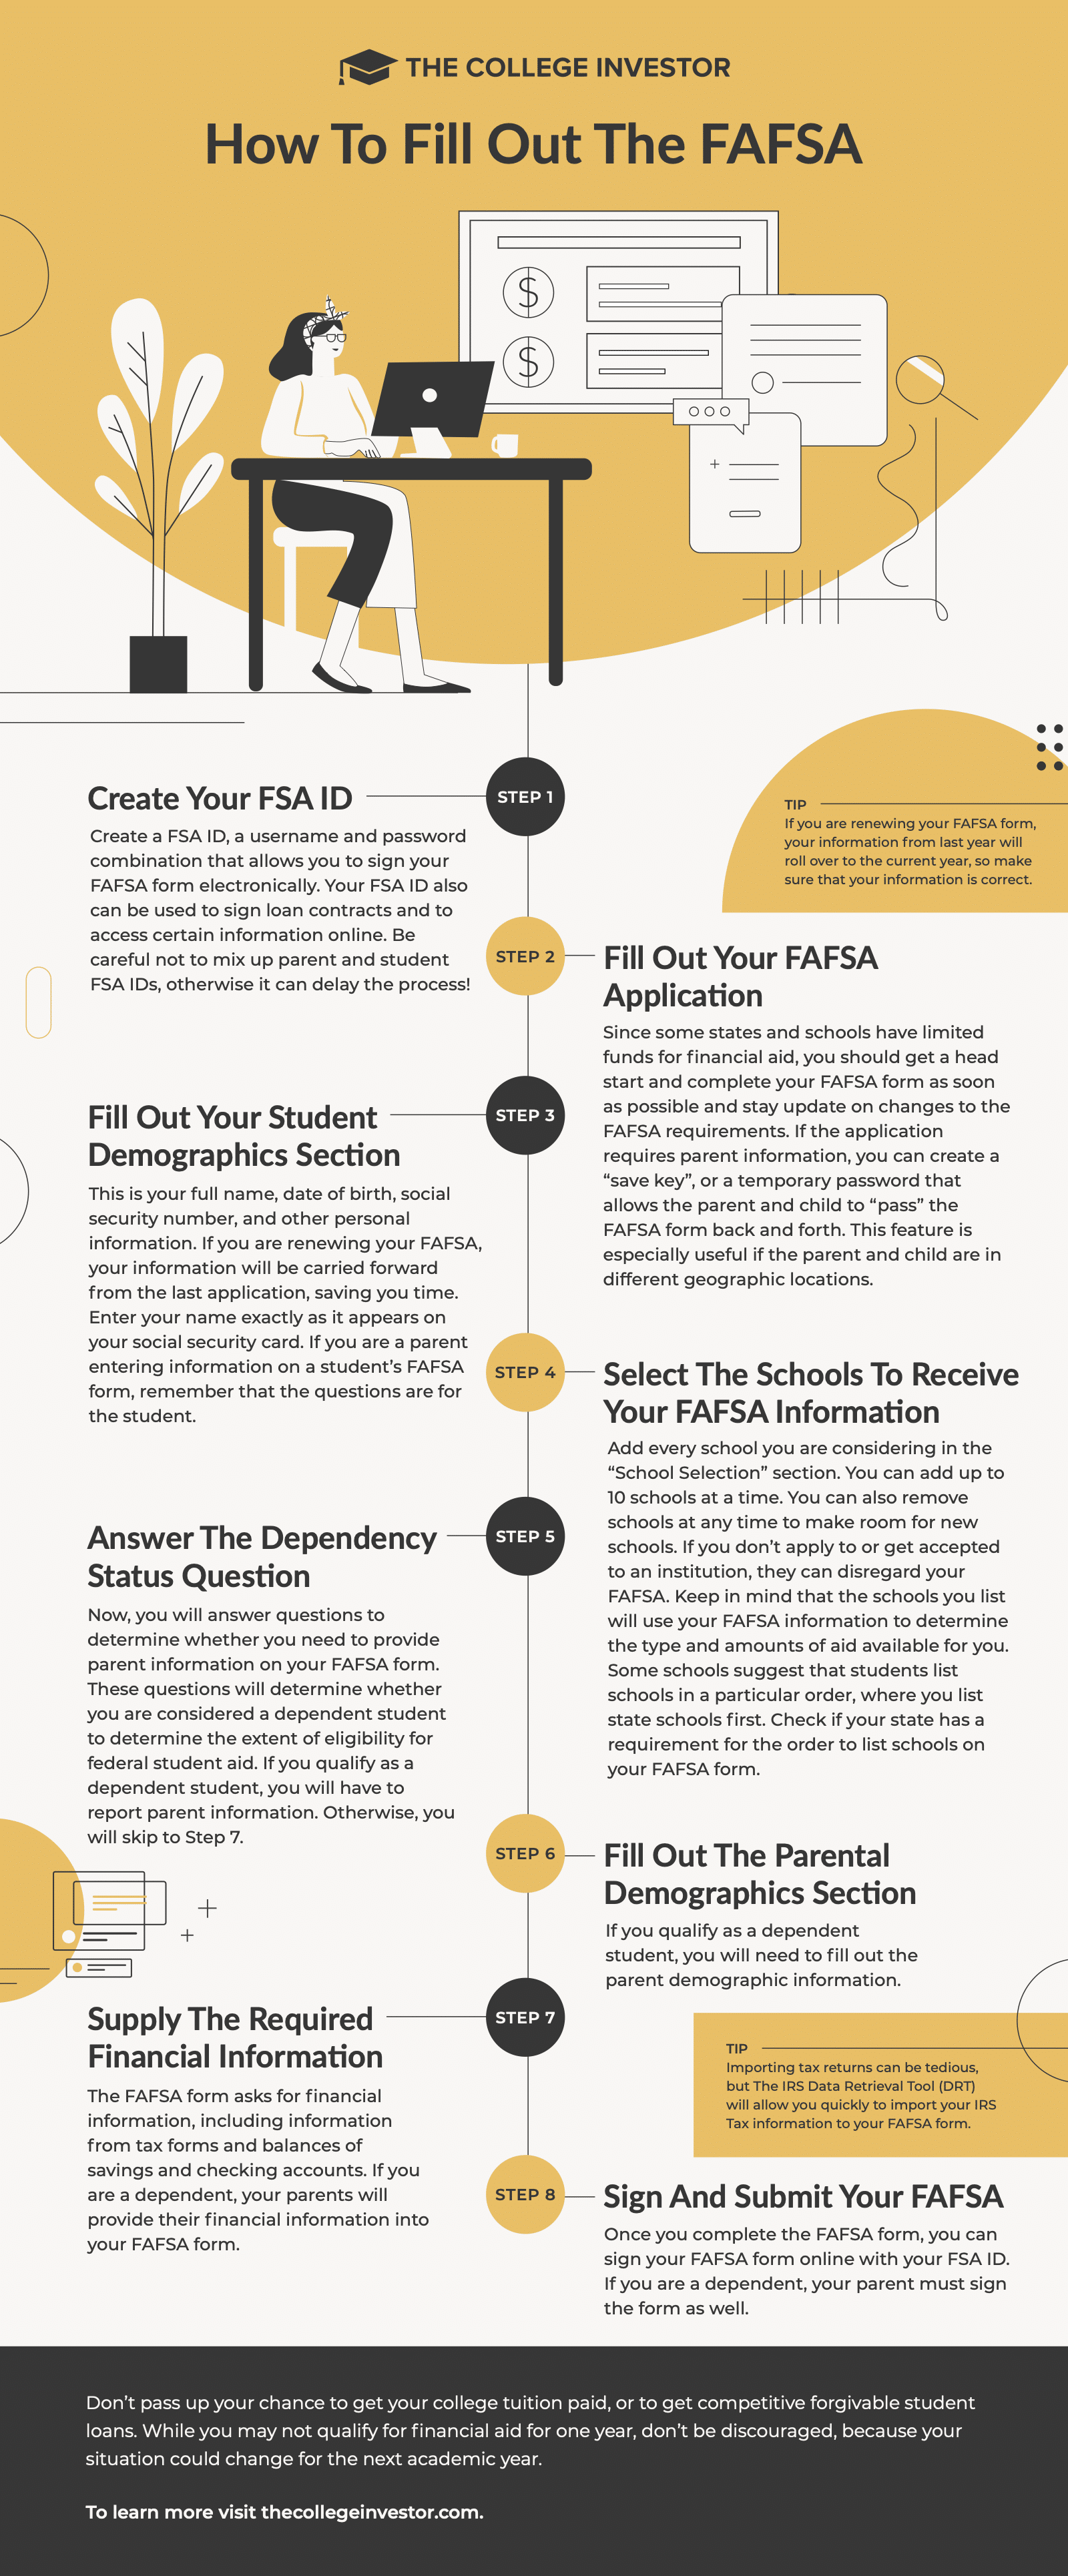 FAFSA Deadlines: How To Fill Out The FAFSA Infographic